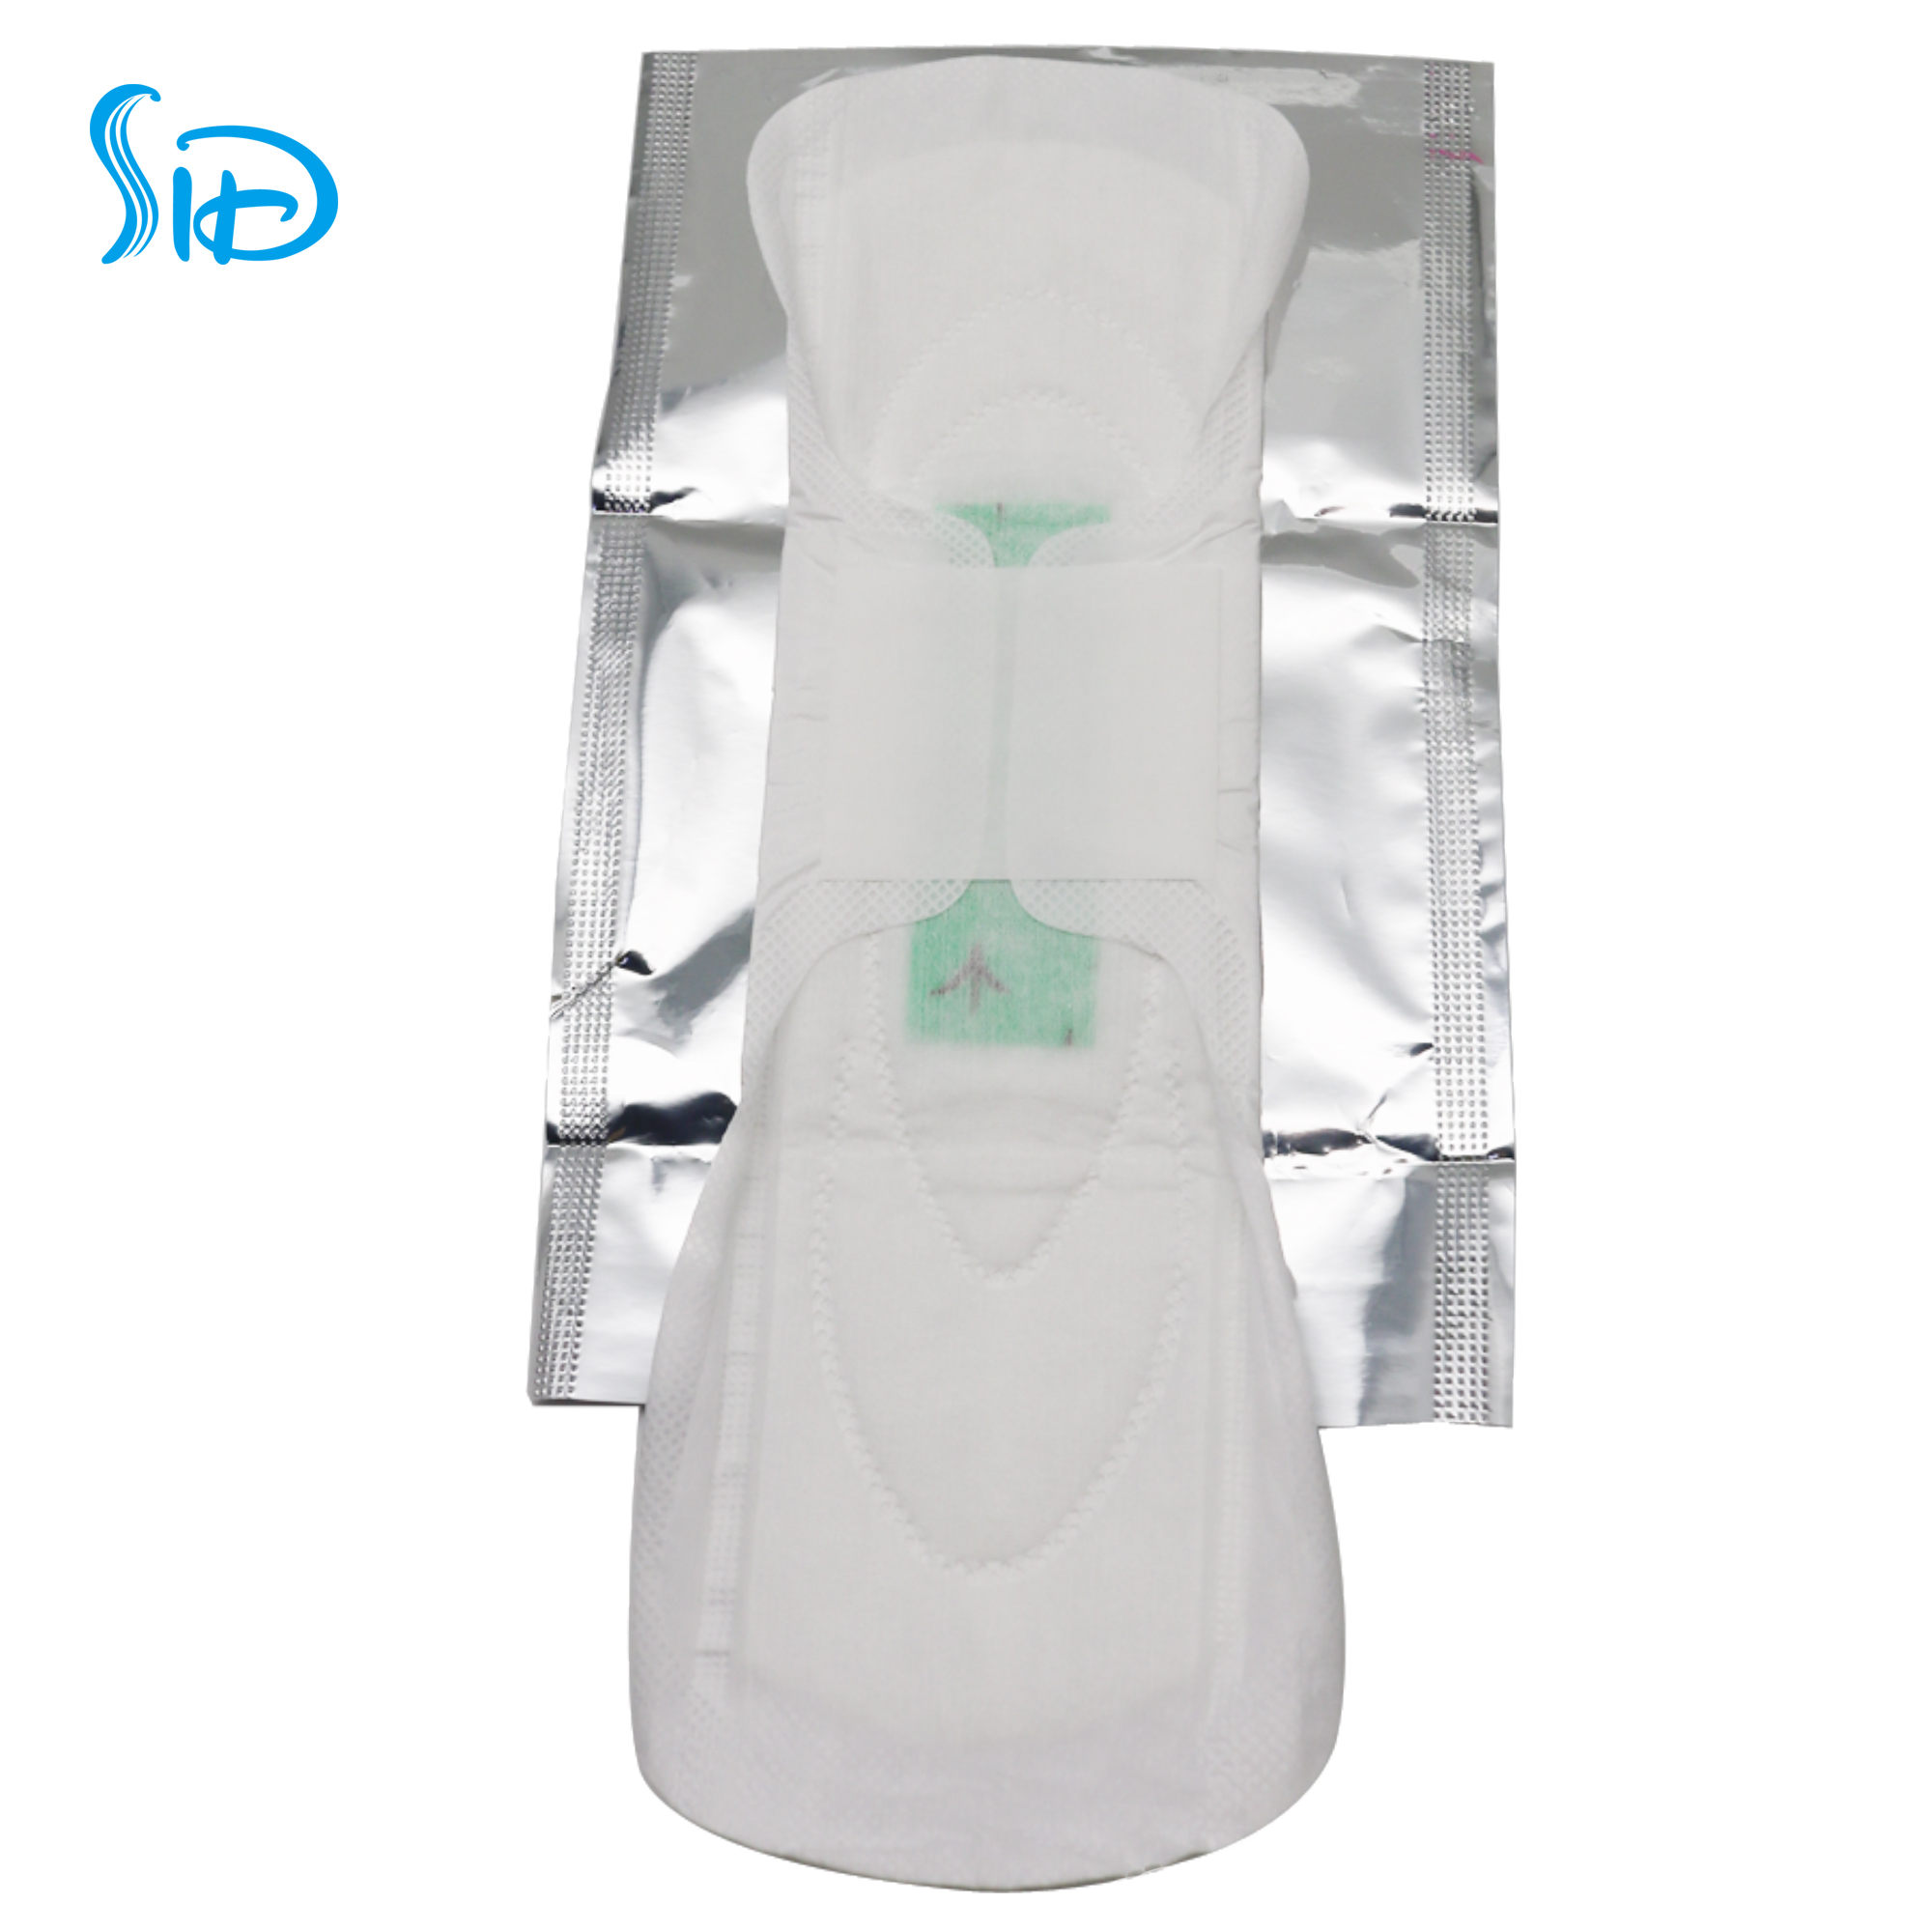 Safe sanitary napkins for menstrual products